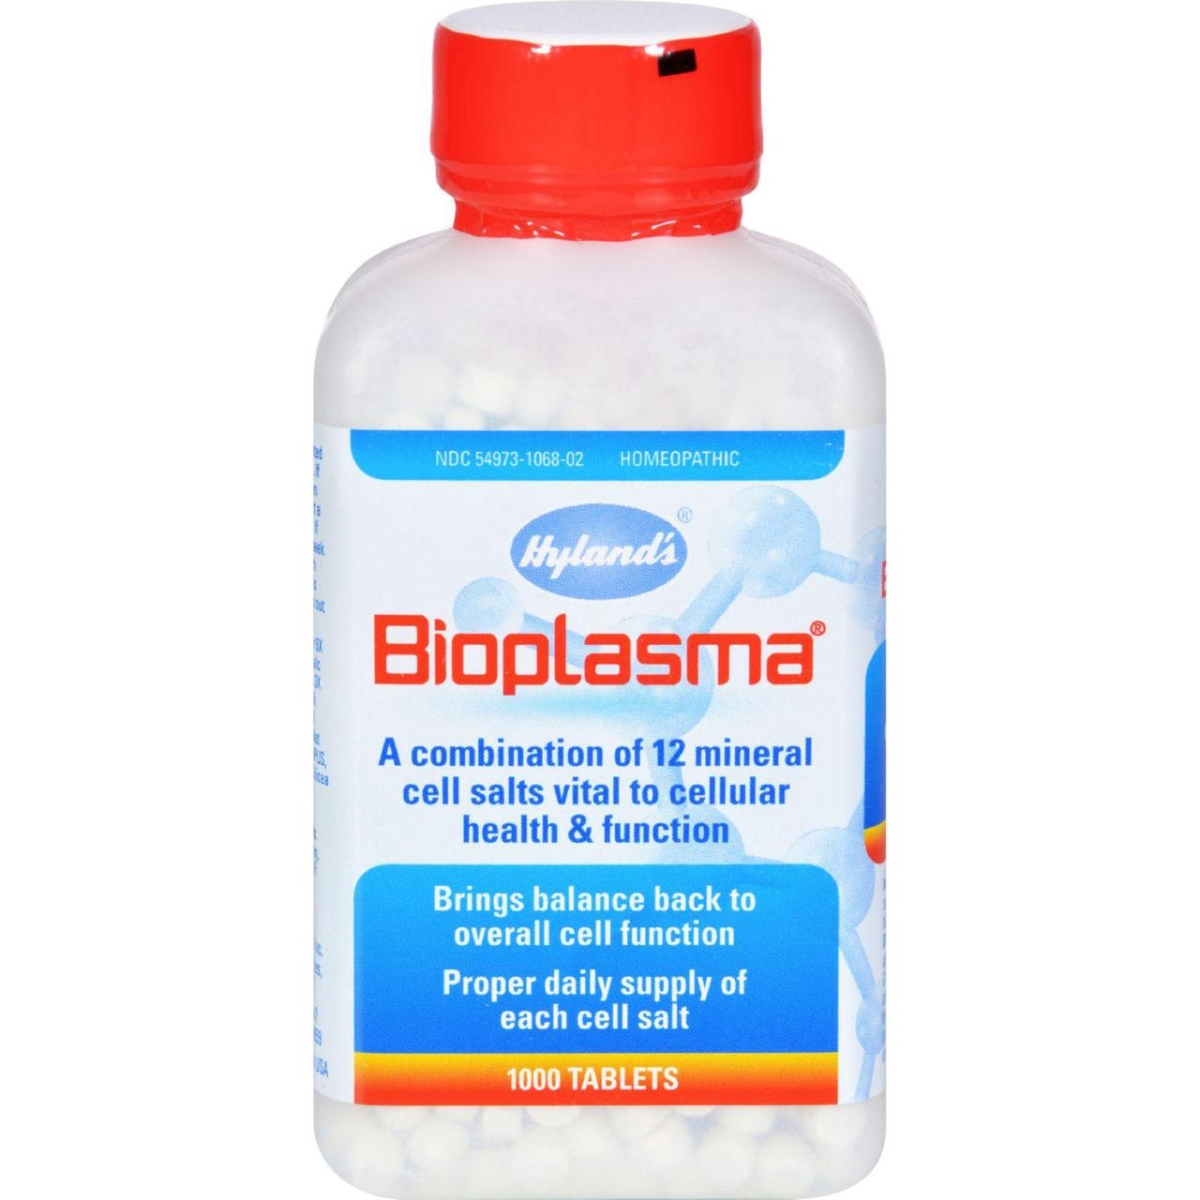 Hg0130963 Homeopathic Bioplasma Cell Salts, 1000 Tablets